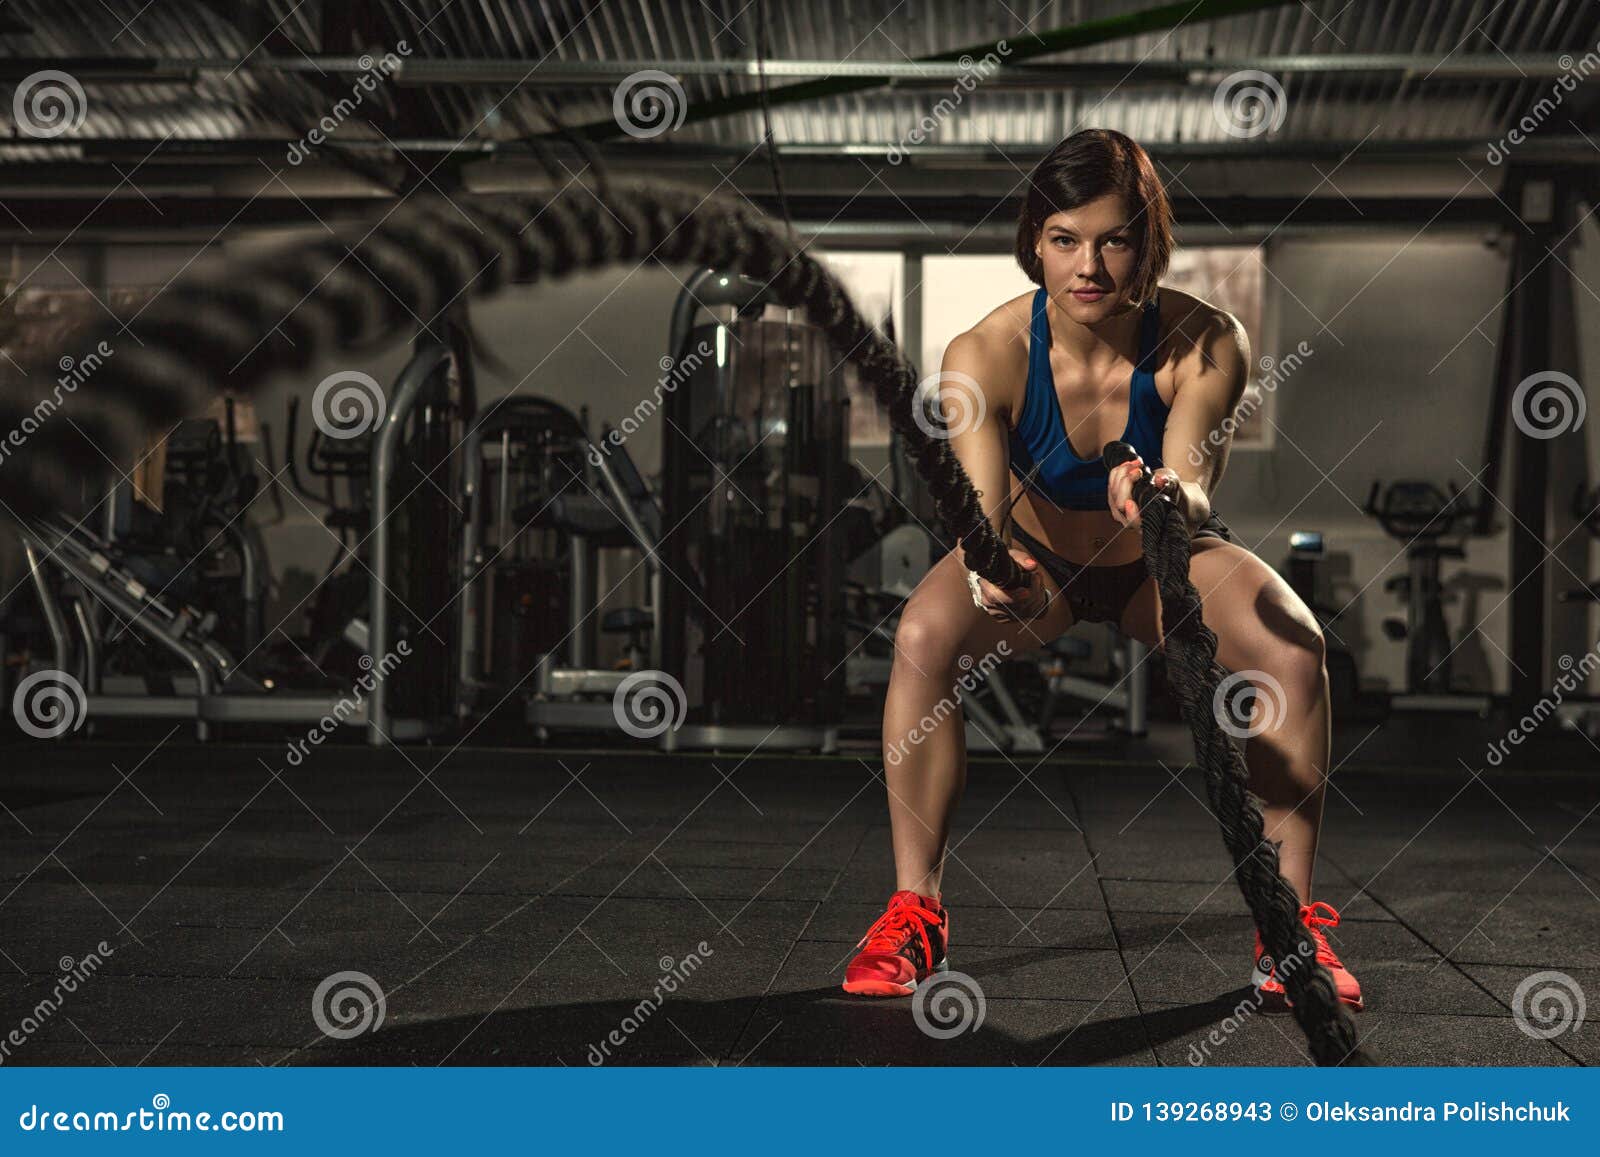 Beautiful Strong Sporty Woman Doing Crossfit Exercise with Battle Ropes  Stock Image - Image of exercise, lifestyle: 139268943